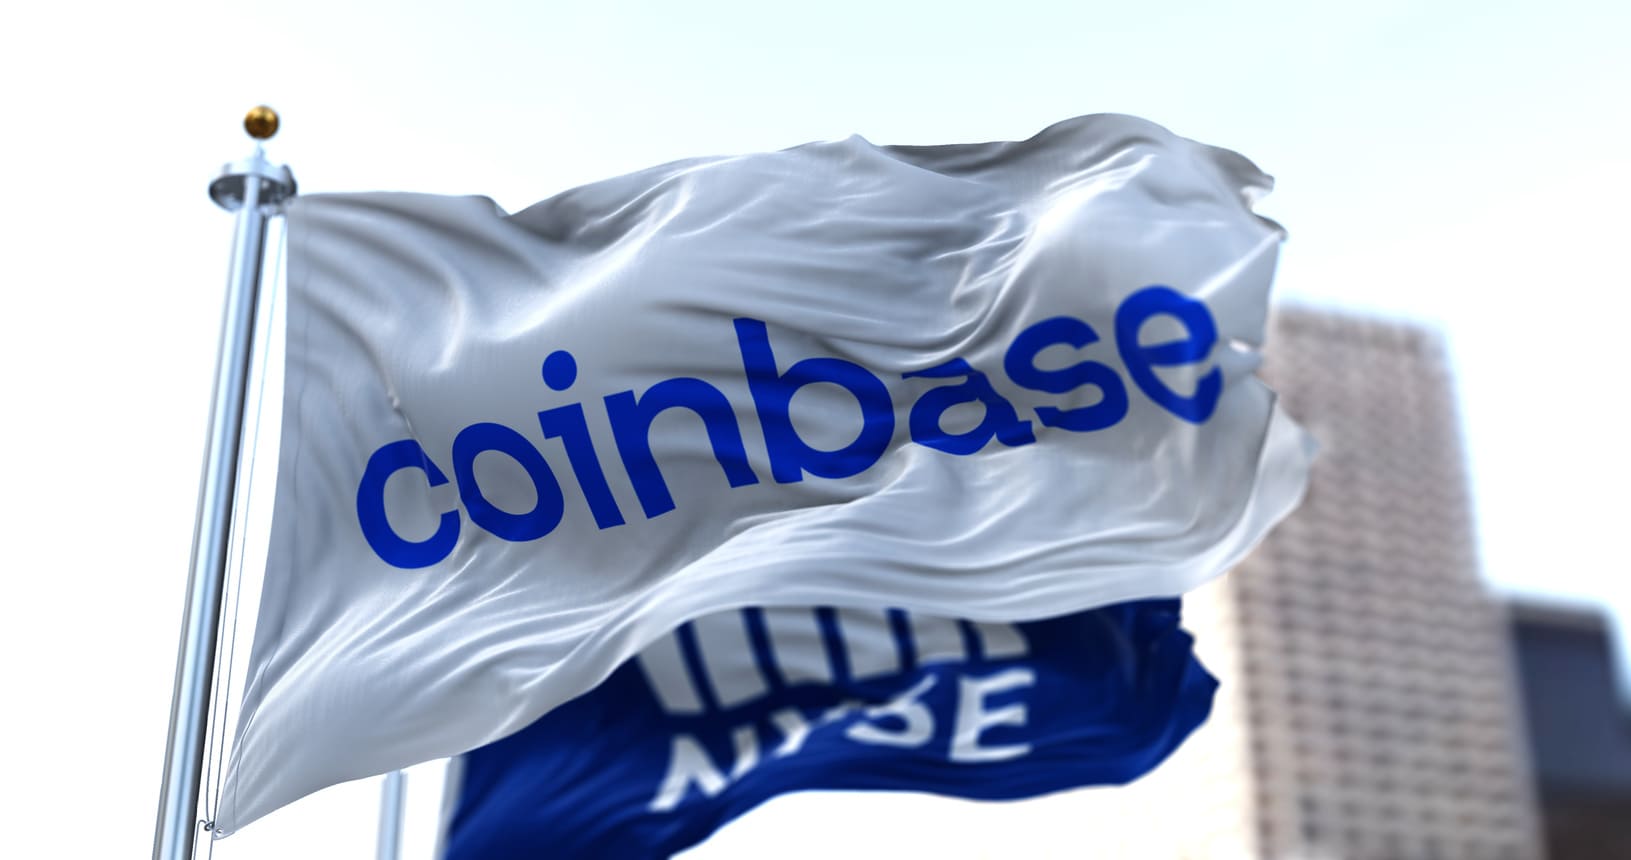 Dutch central bank fined Coinbase for €3.6 million